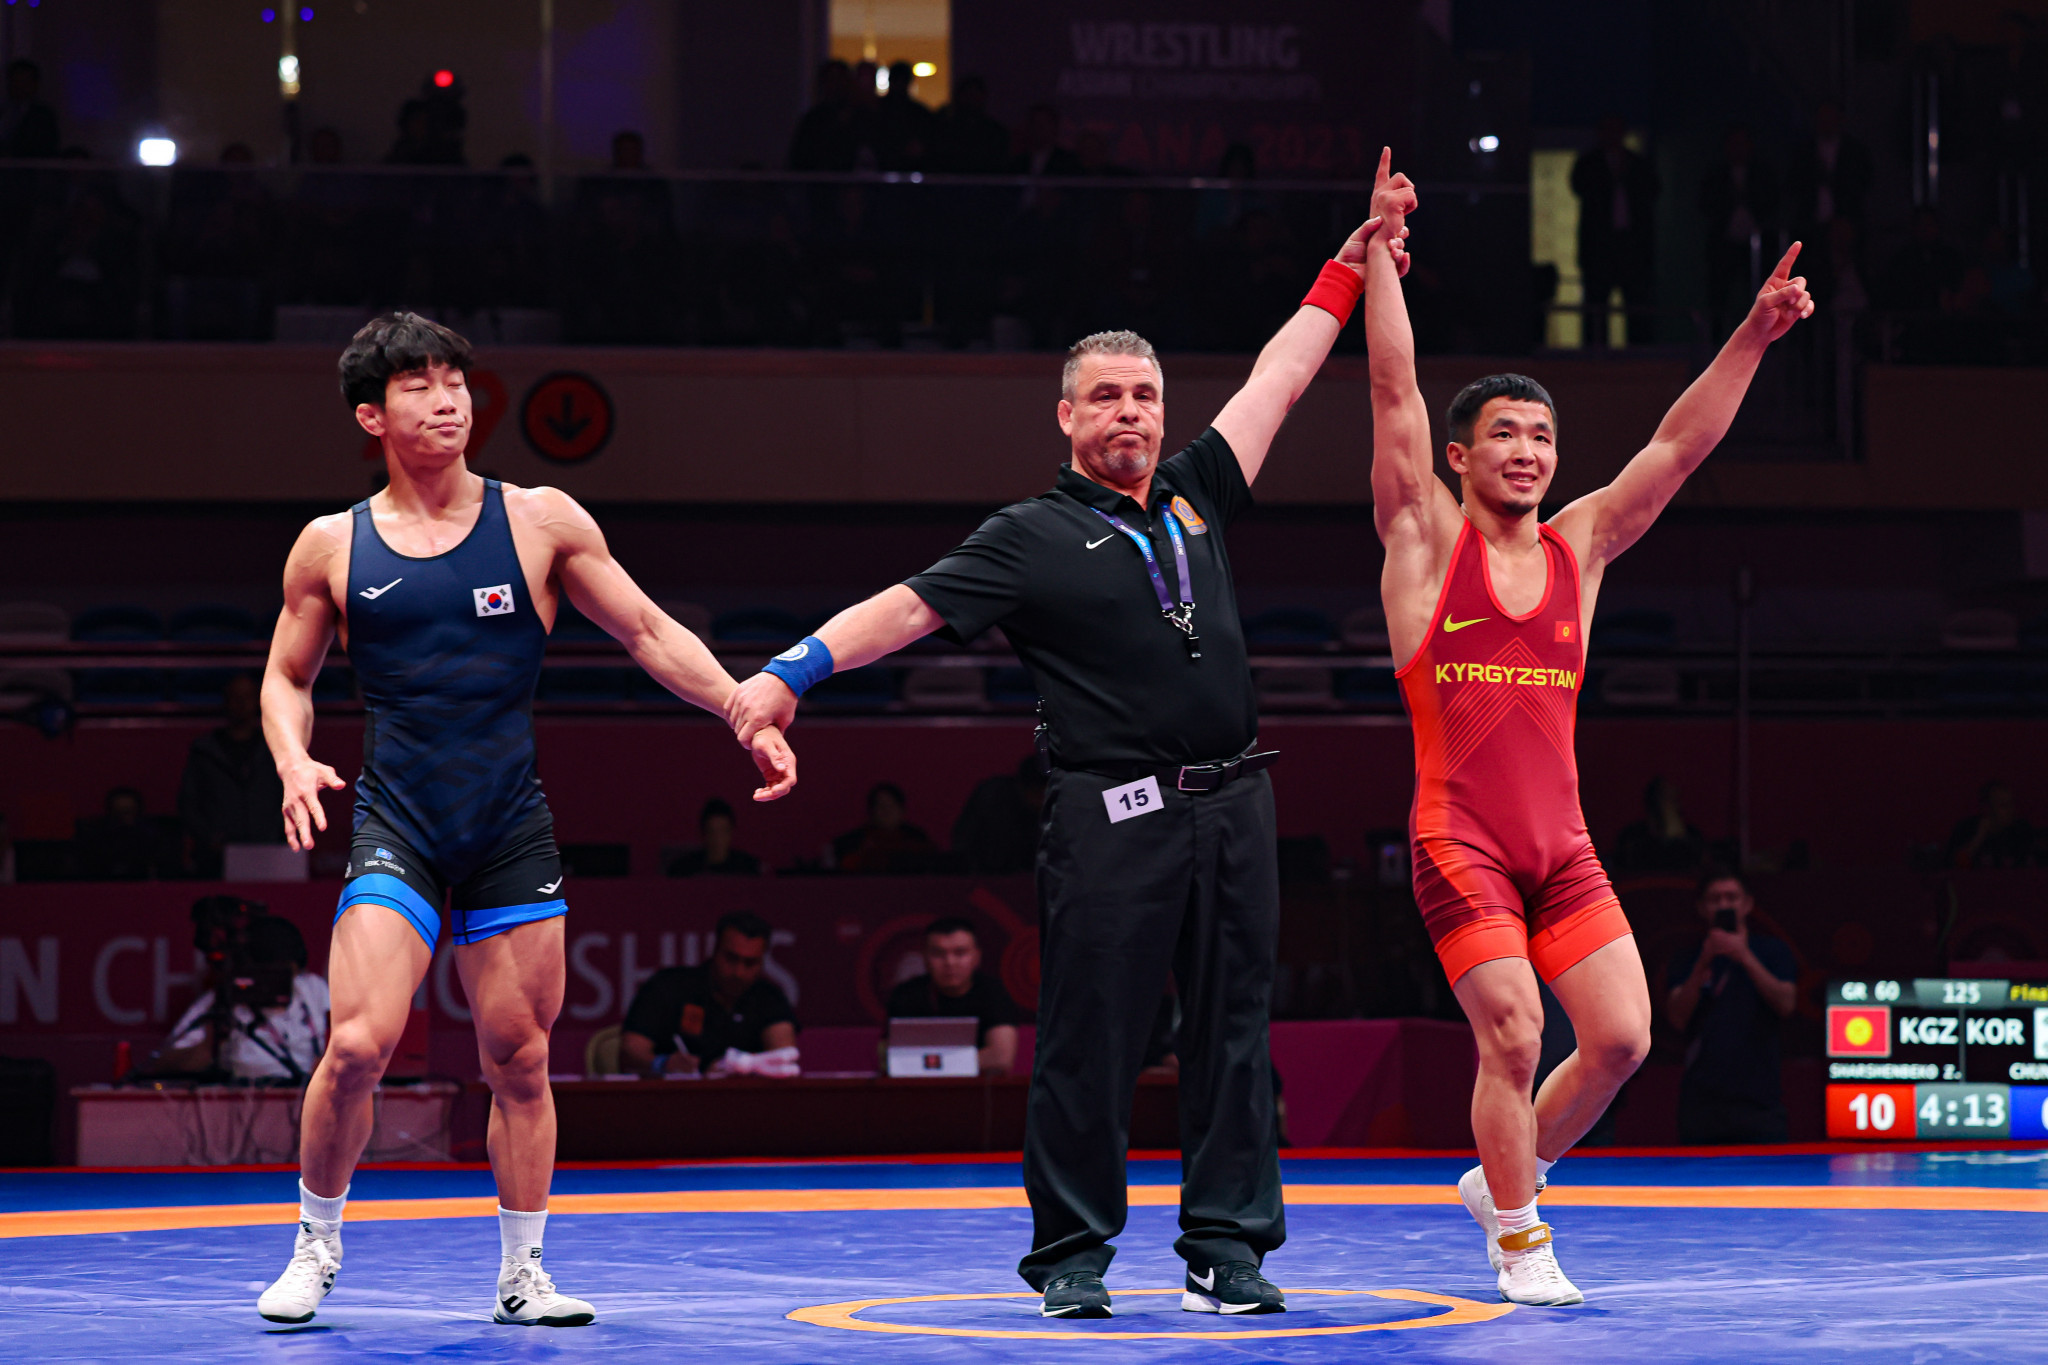 Kyrgyzstan's Zholaman Sharshenbekov, right, eased to a 10-0 win by technical fall in the Greco-Roman 60kg final against South Korea's Chung Han-jae, left, at the Asian Championships in Astana ©UWW